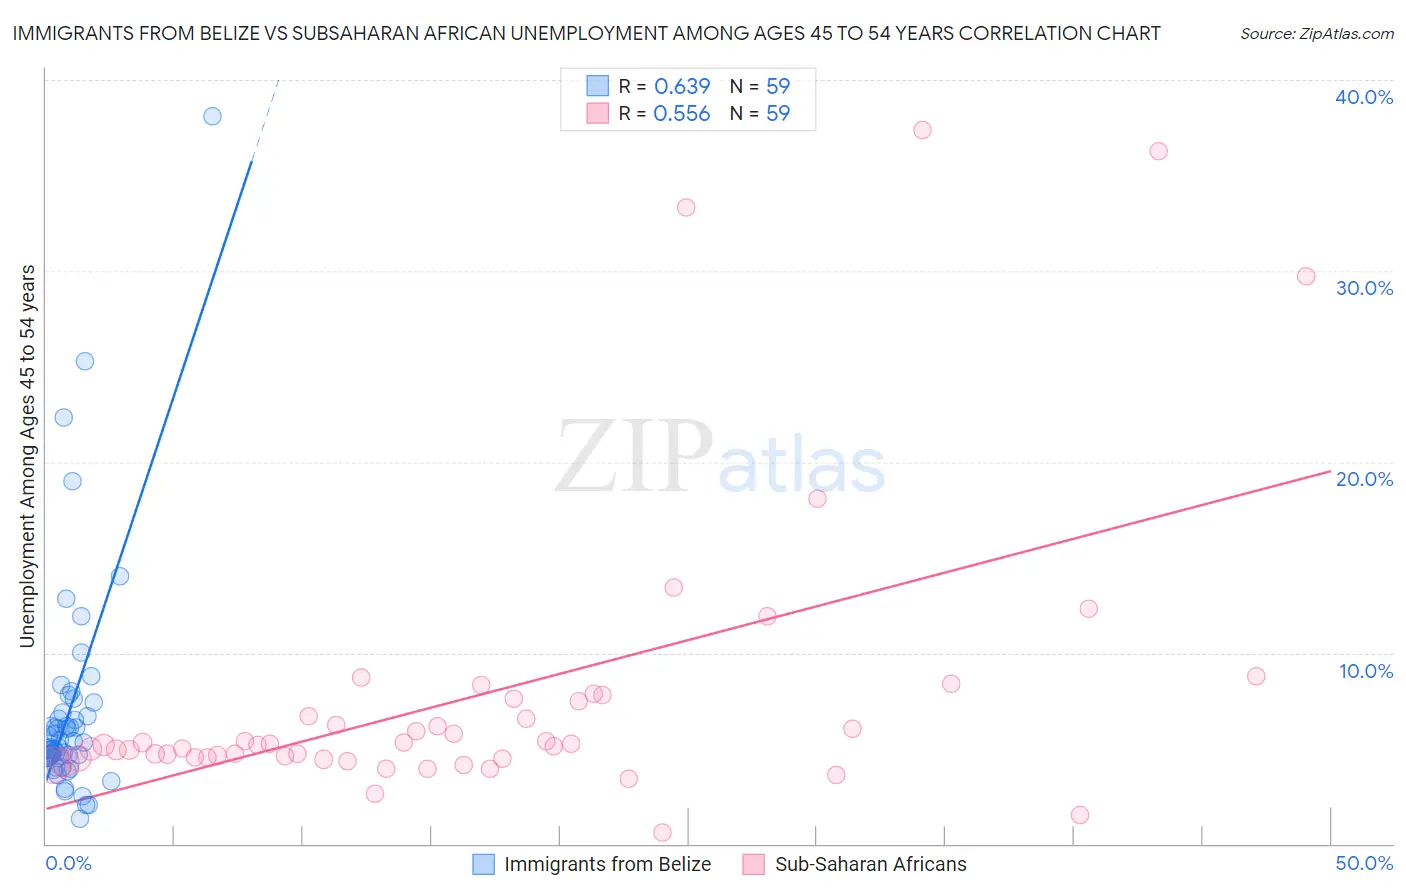 Immigrants from Belize vs Subsaharan African Unemployment Among Ages 45 to 54 years